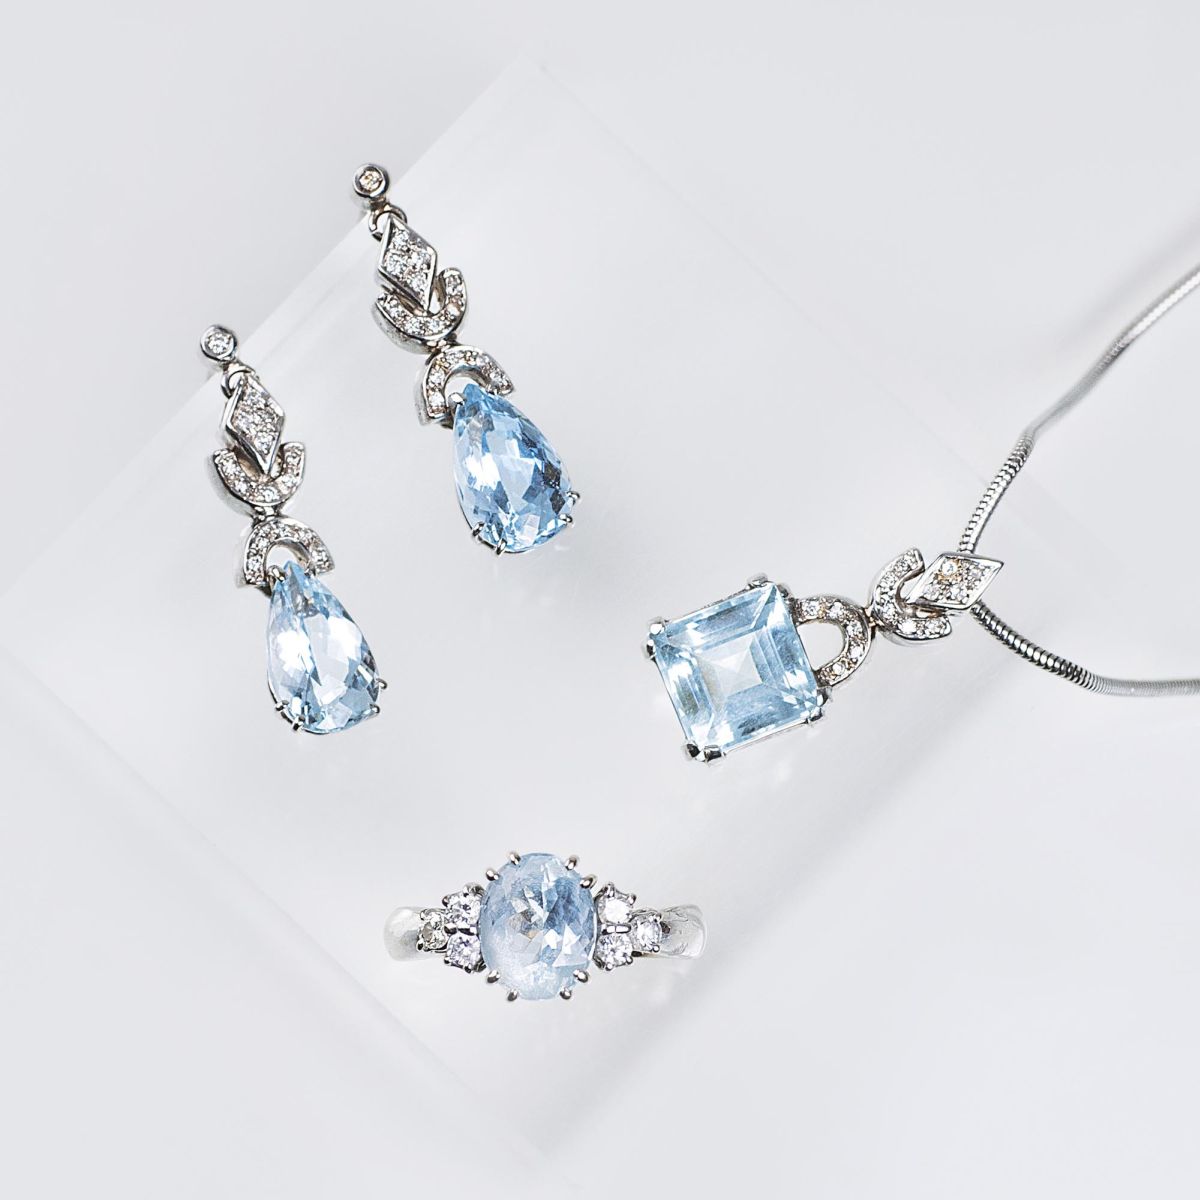 An Aquamarine Diamond Jewelry Set with ring, pendant and earrings